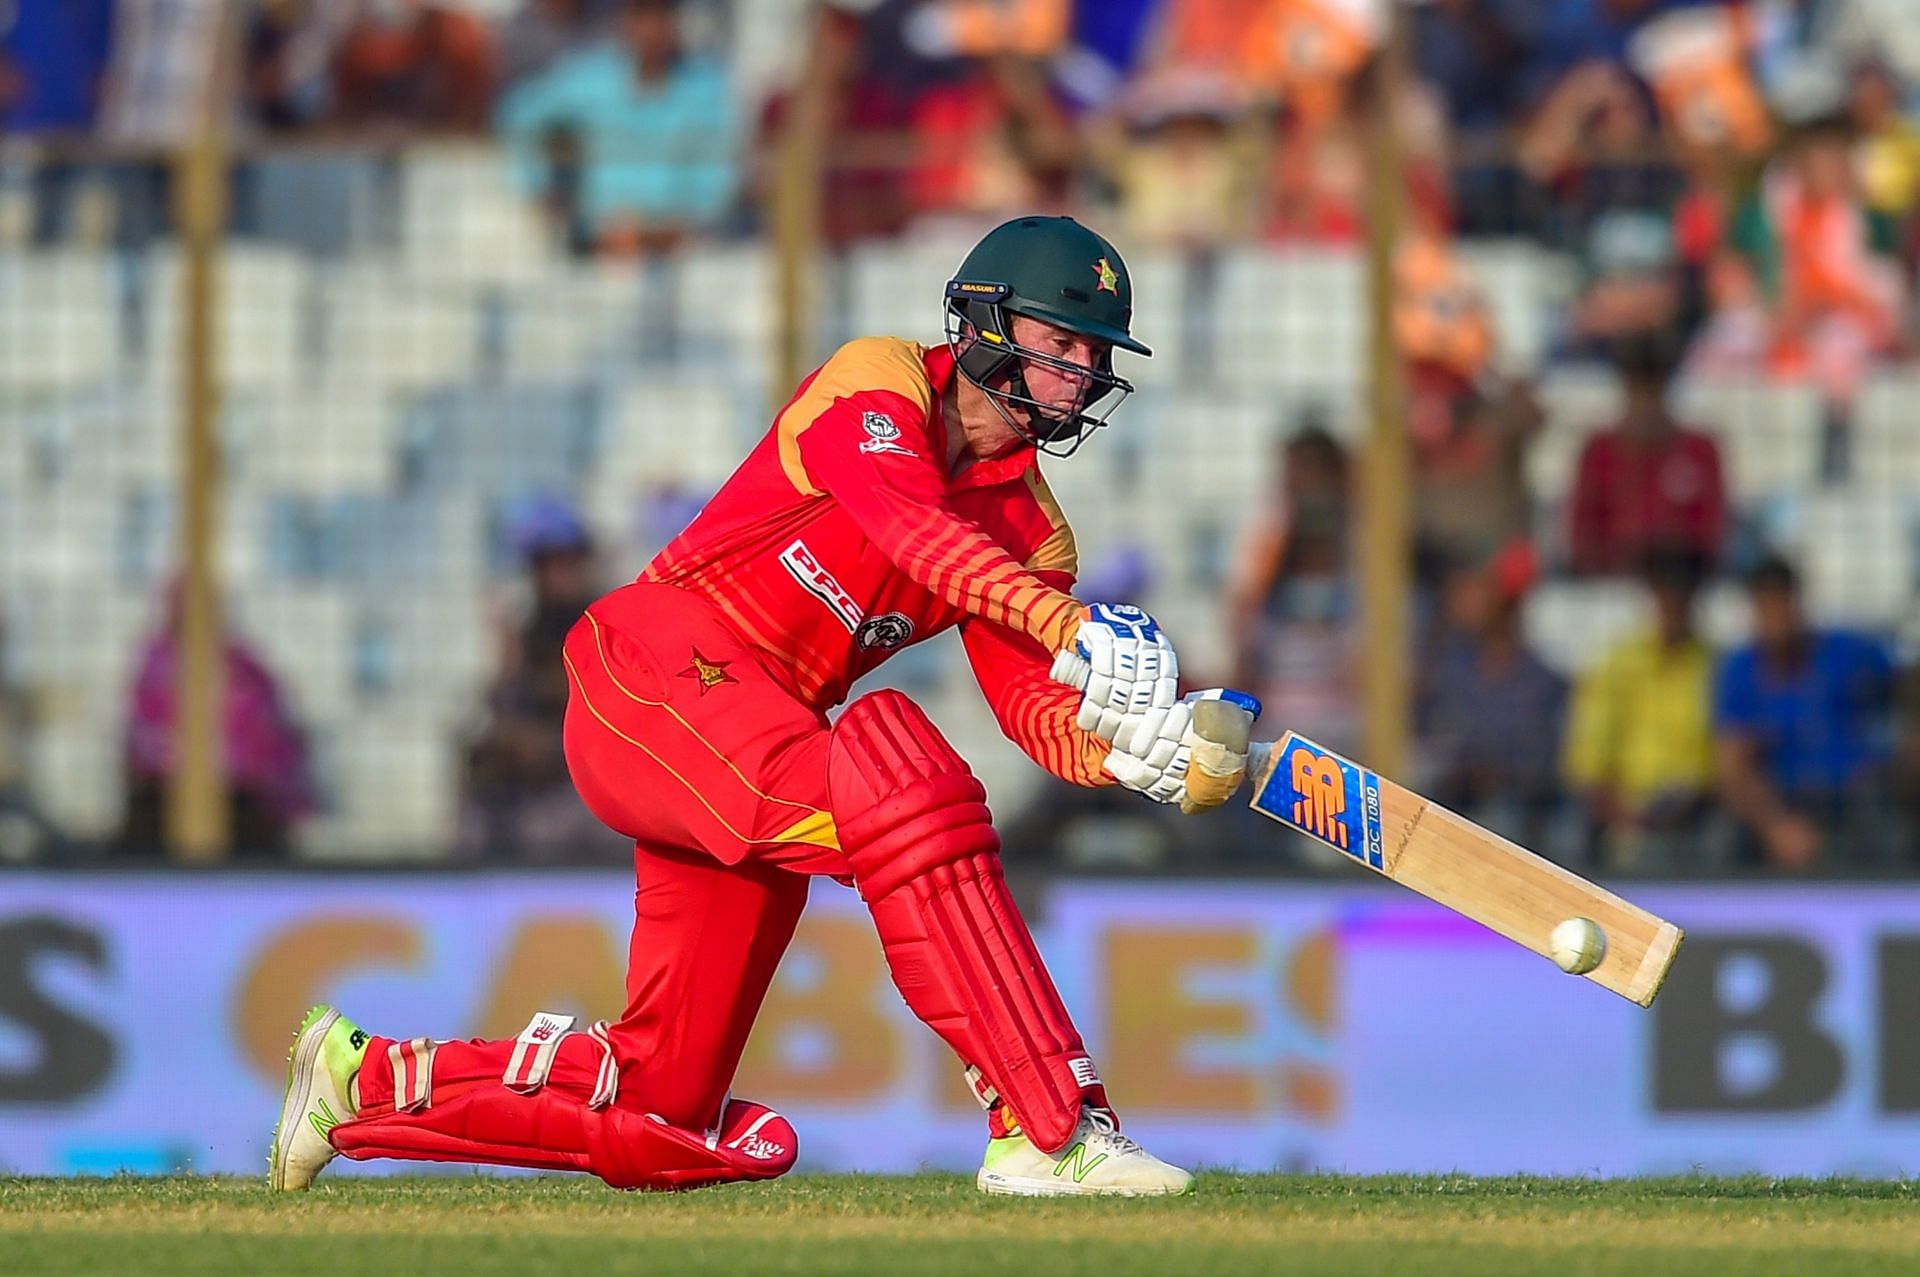 Sean Williams in action for Zimbabwe (Image Courtesy: ICC Cricket)